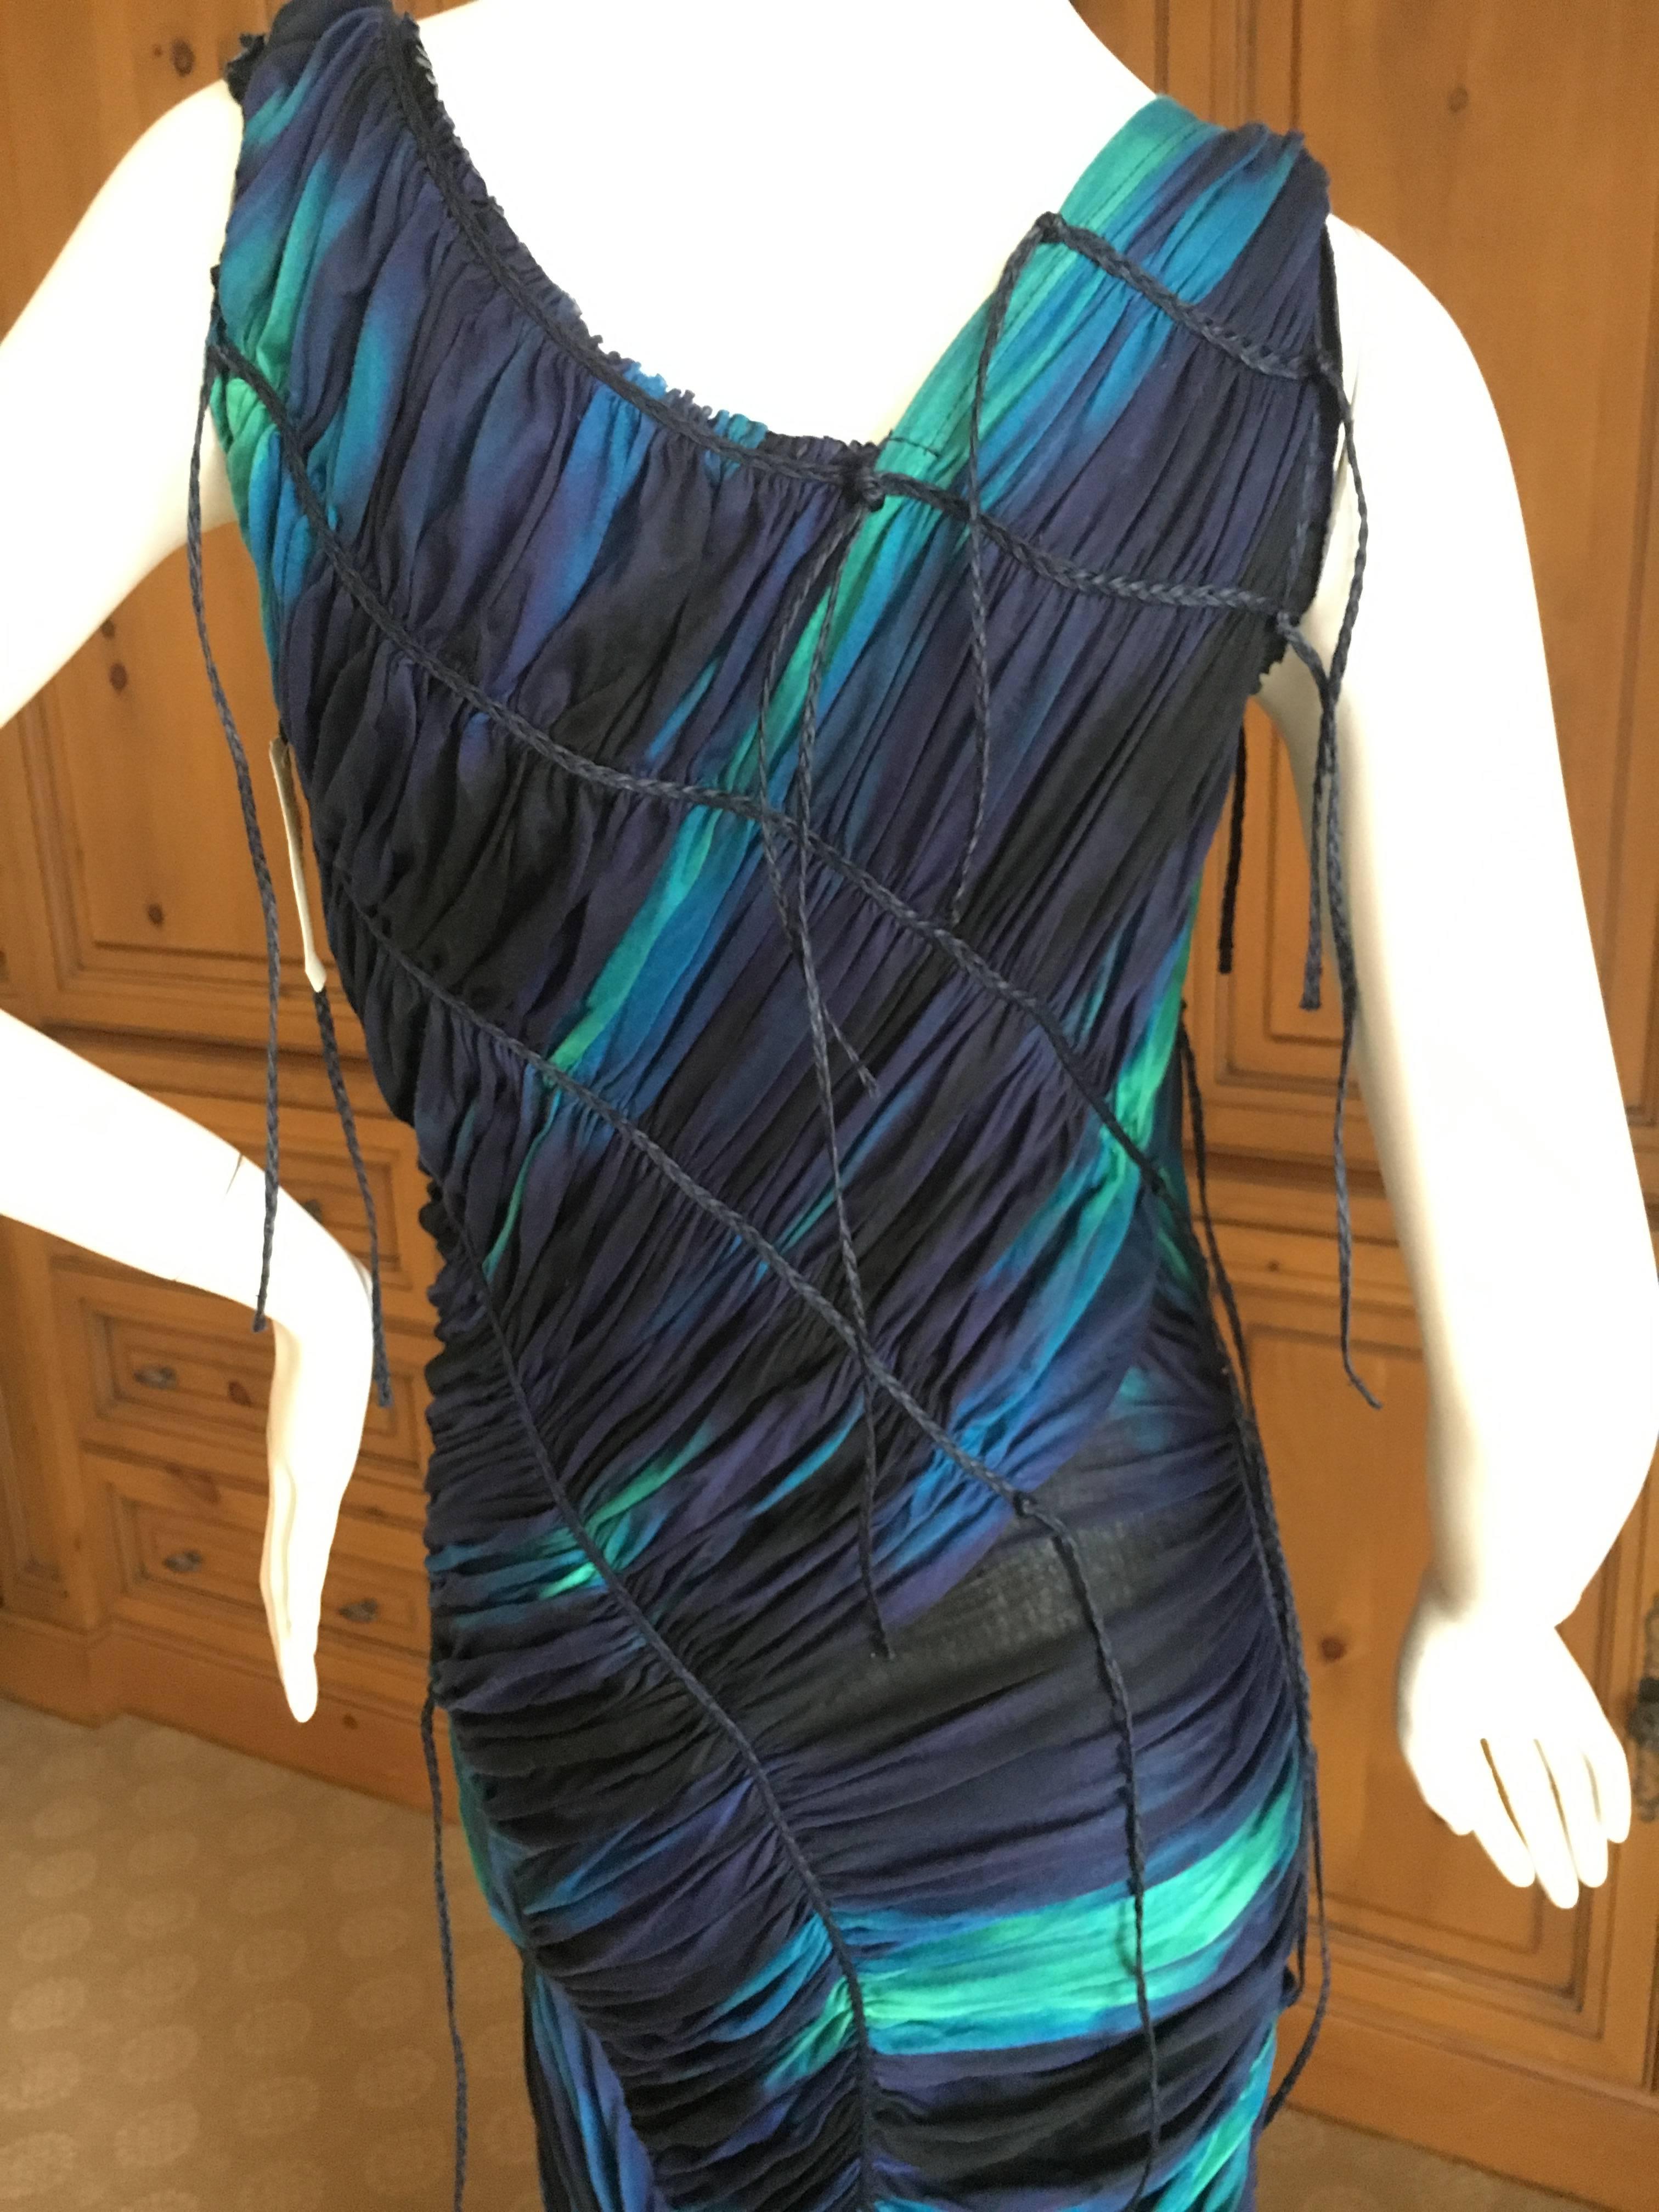 Issey Miyake Bergdorf Goodman 1990's Tie Dye Ruched Dress New with Tags 1